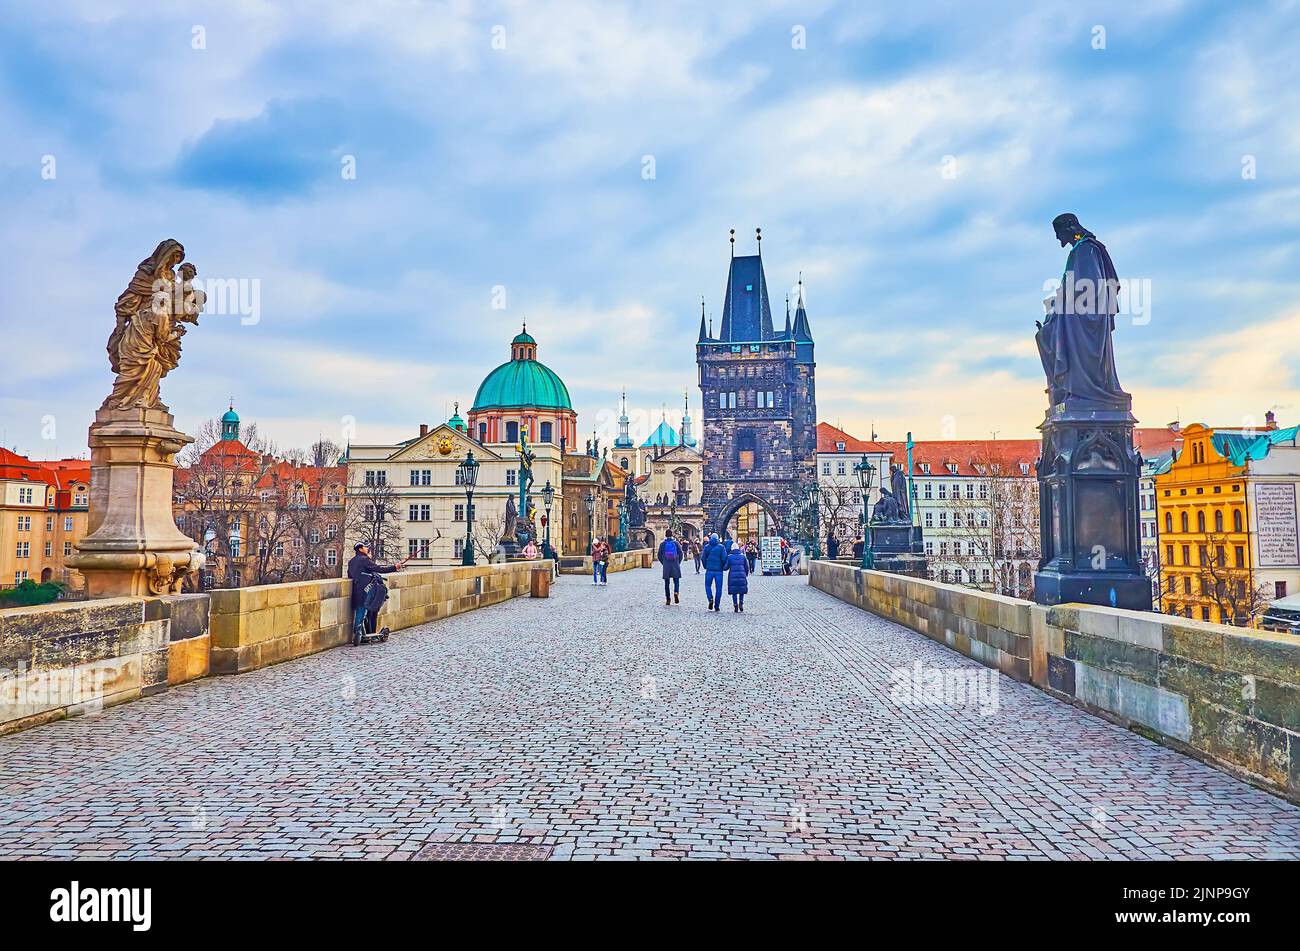 The Old Town Bridge Tower of Charles Bridge with historic statues and the dome of basilica of St Francis of Assisi, Prague, Czech Republic Stock Photo